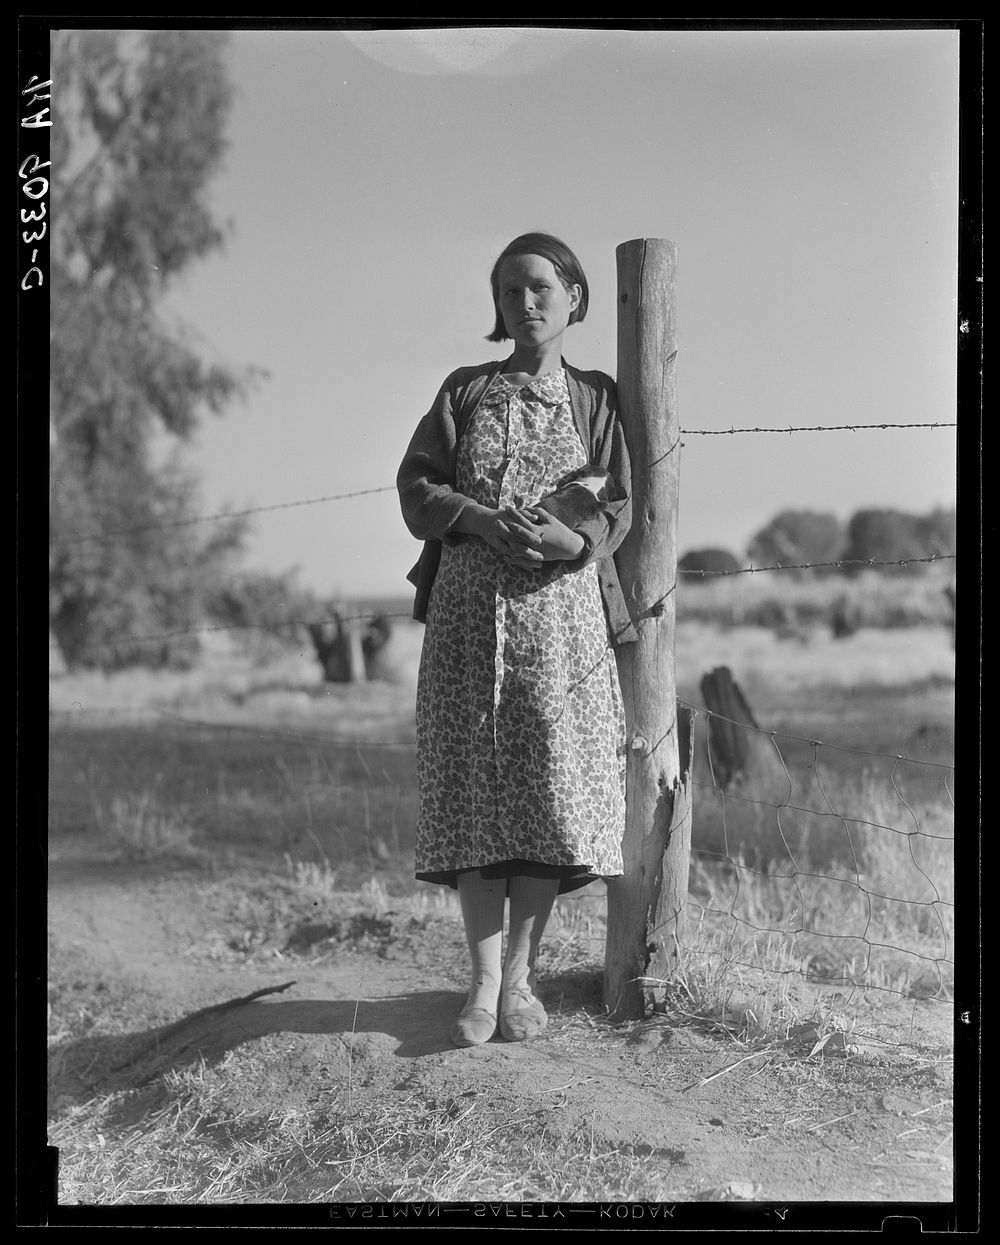 Pregnant migrant woman living in California squatter camp. Kern County by Dorothea Lange